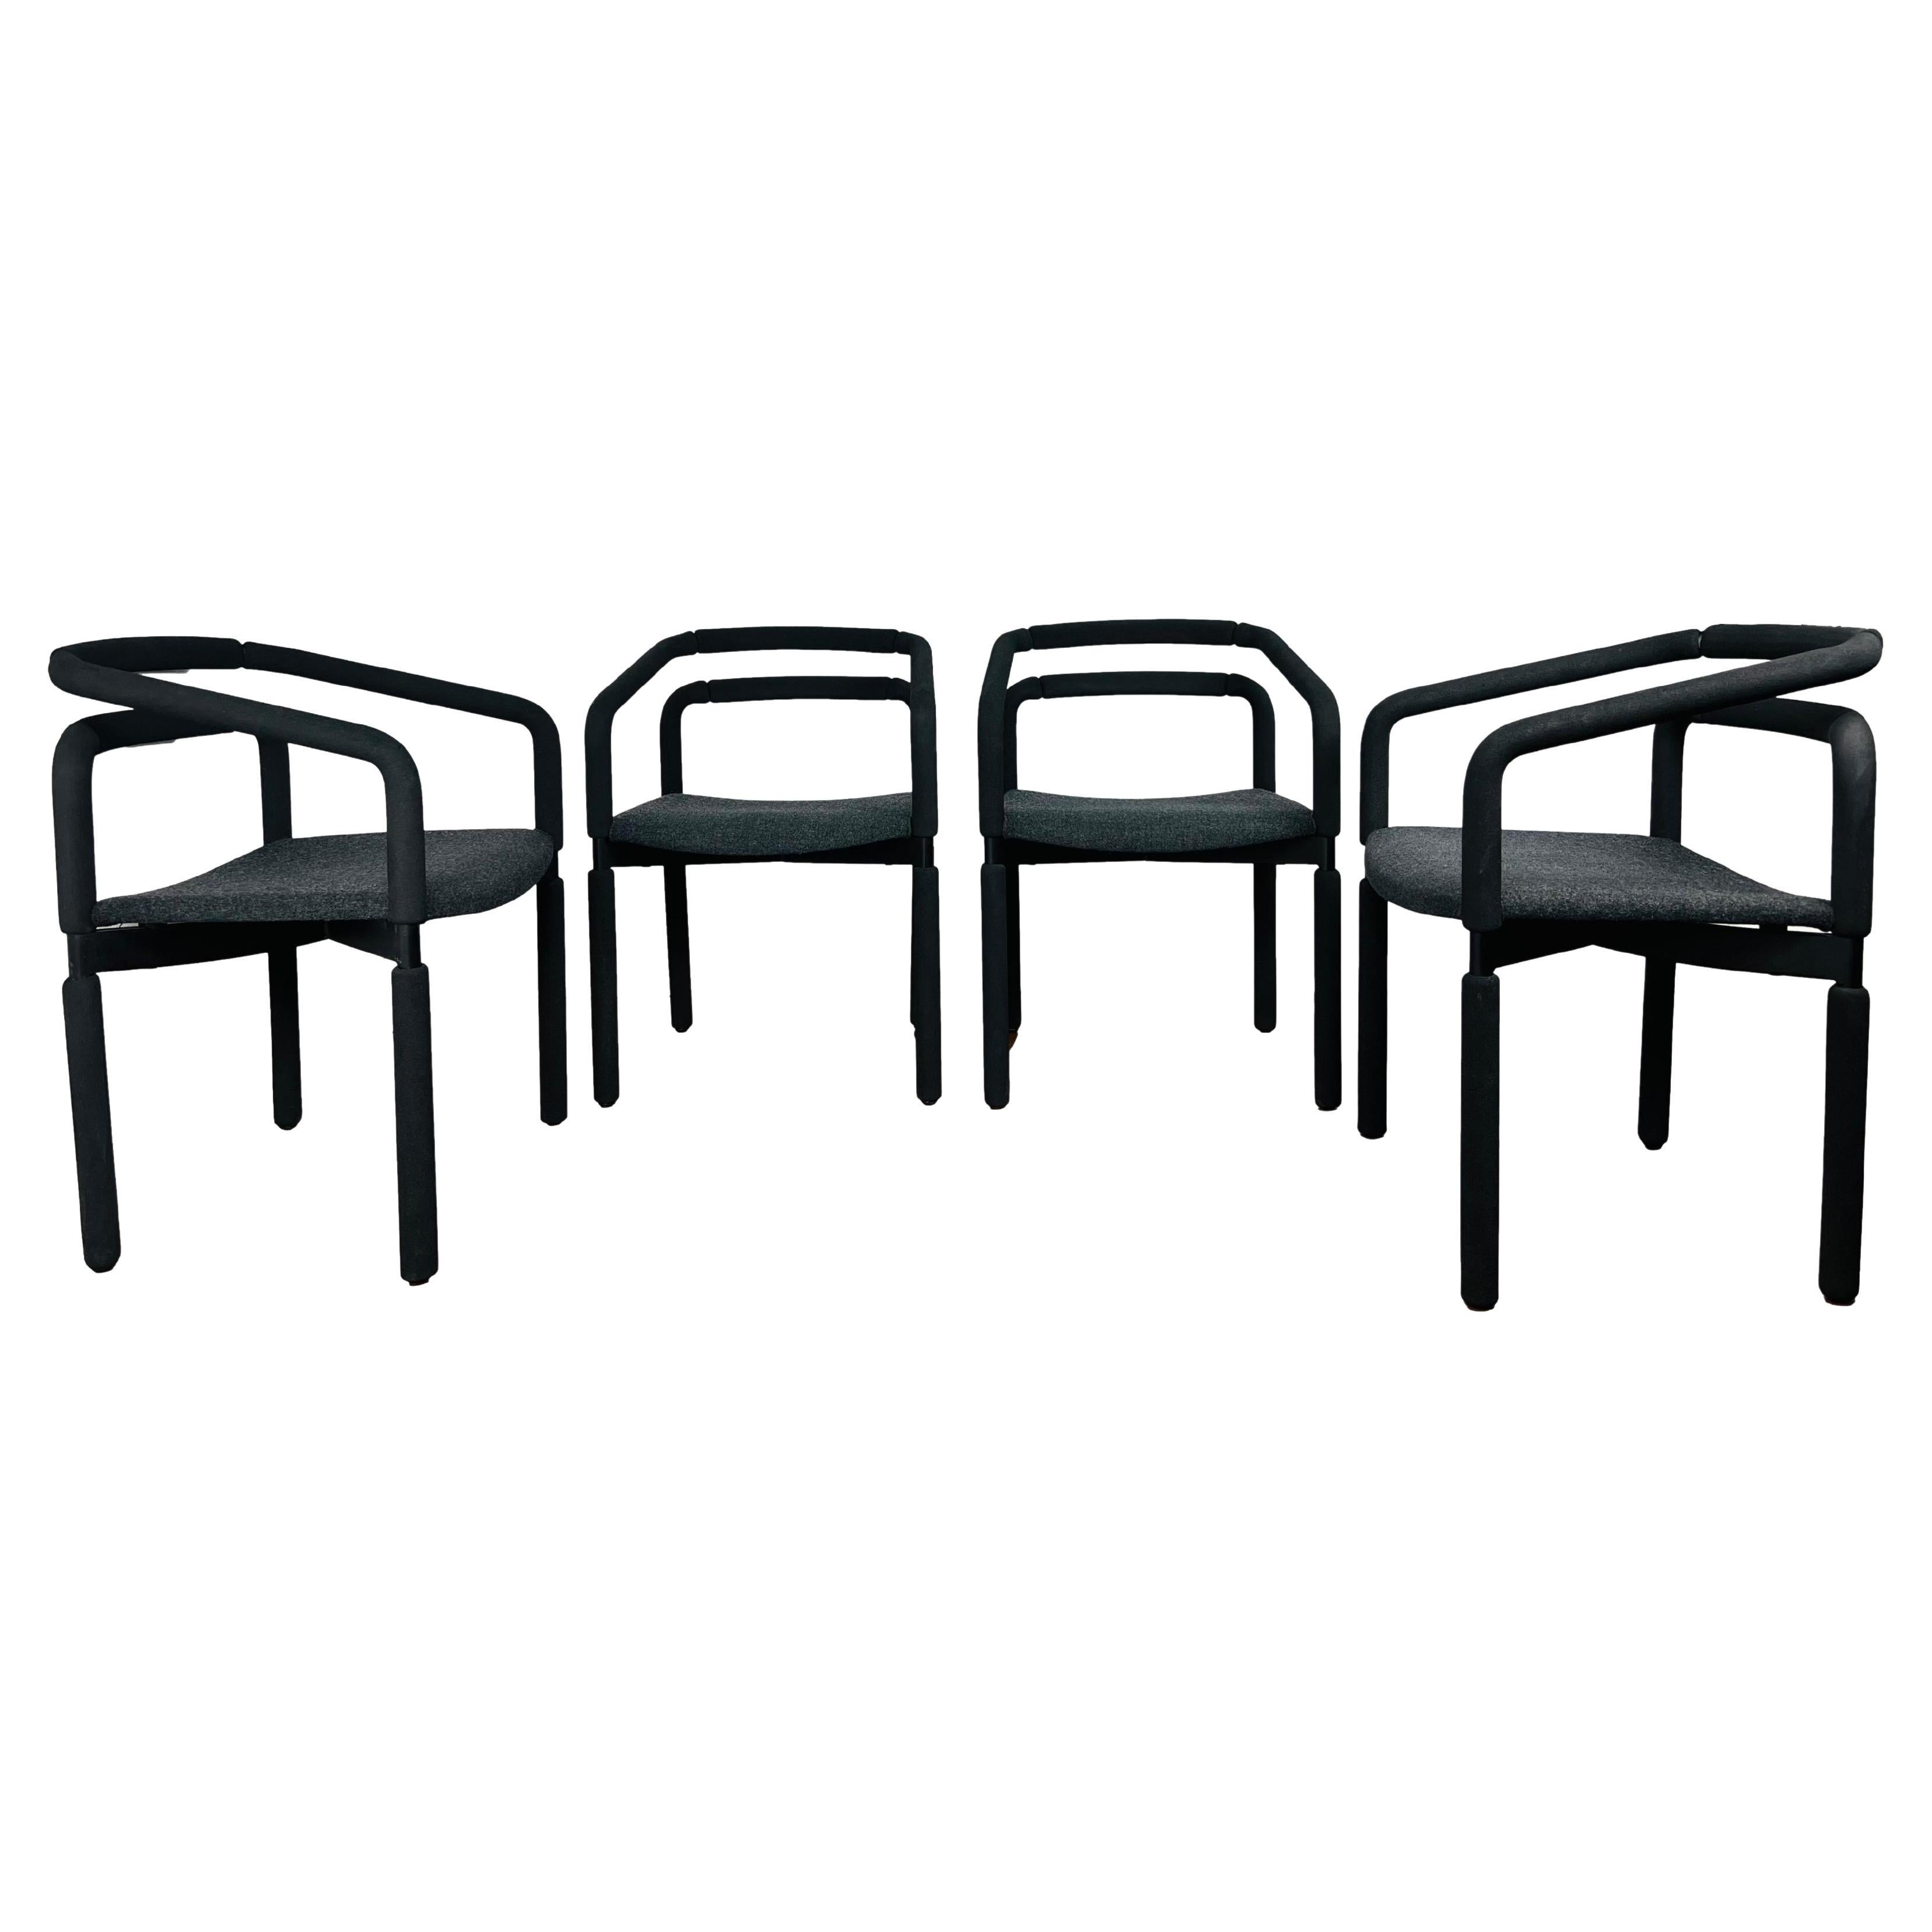 Set of 4 1980s "Rubber Chairs" by Brian Kane for Metropolitan Furniture